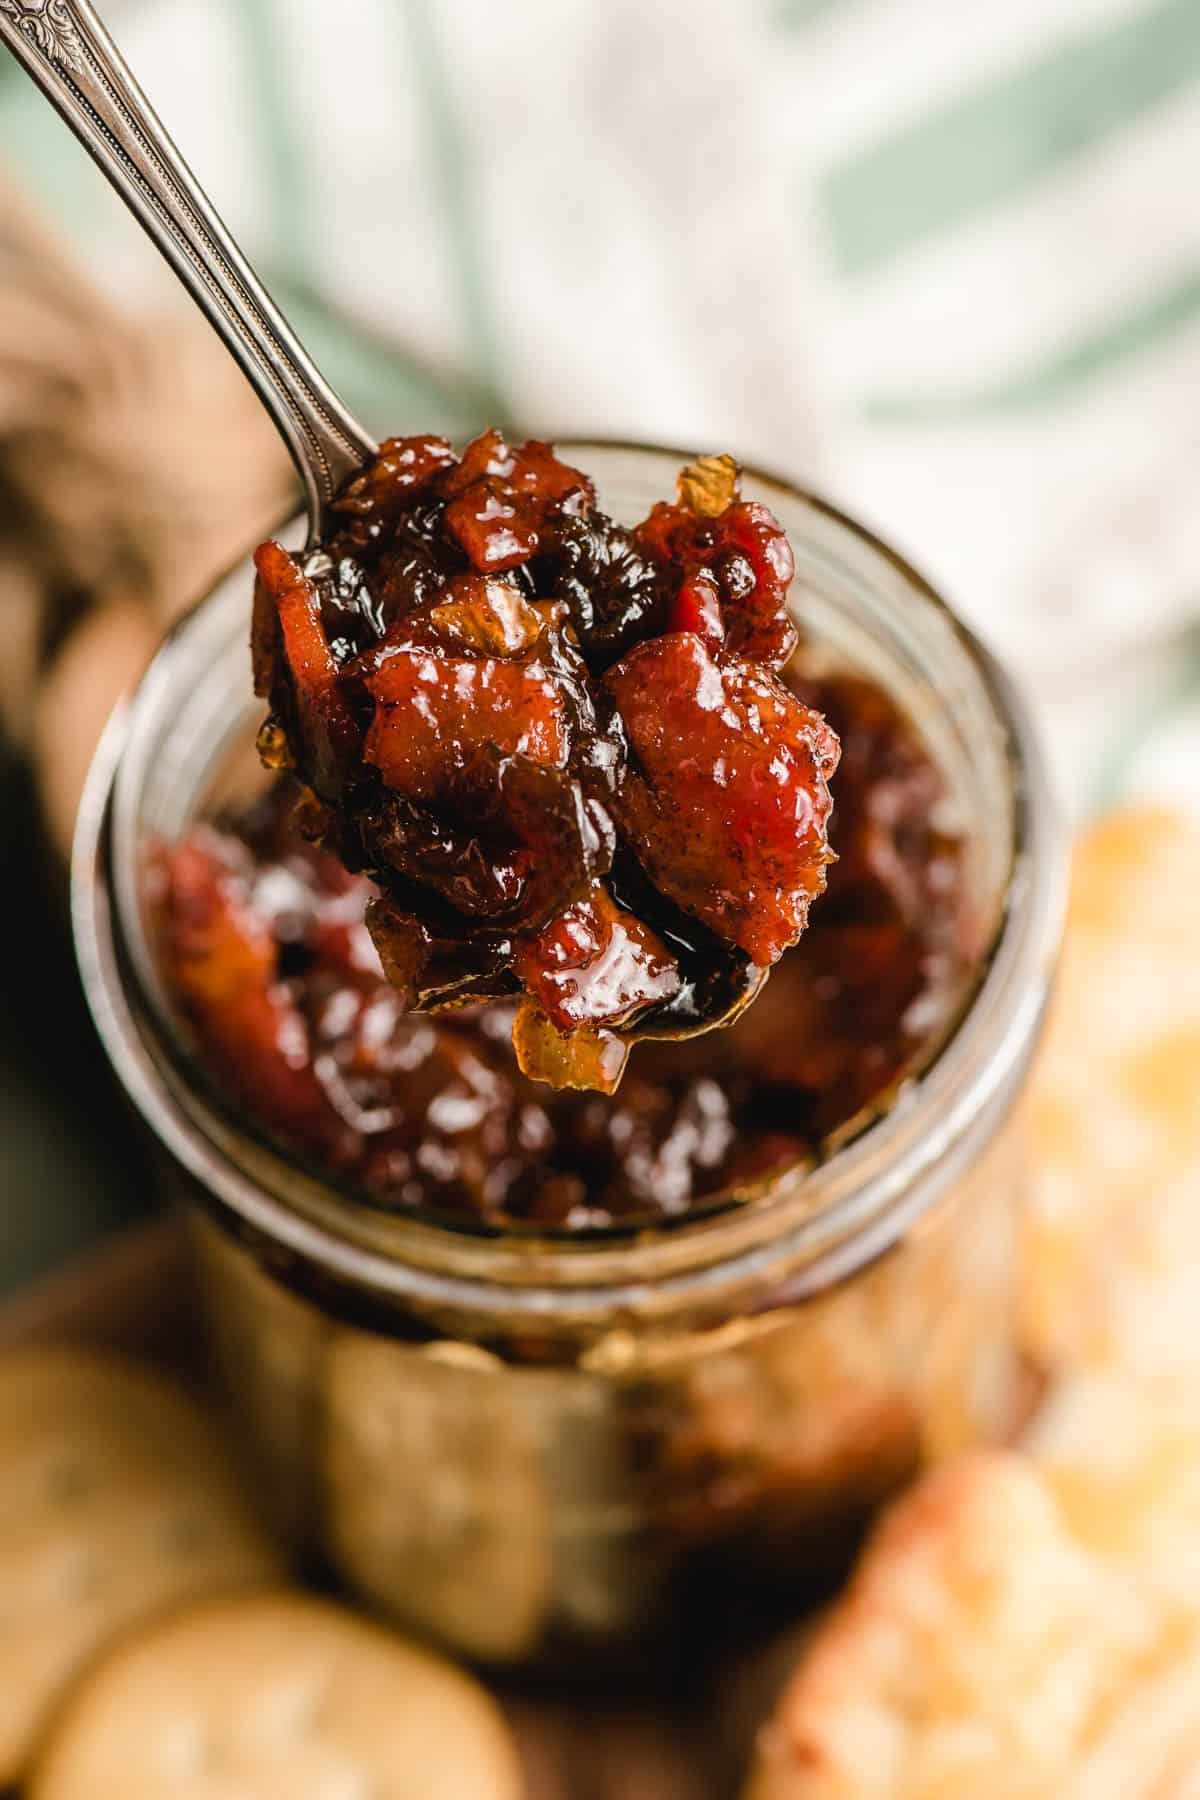 Spoon scooping bacon onion jam out of a jar.